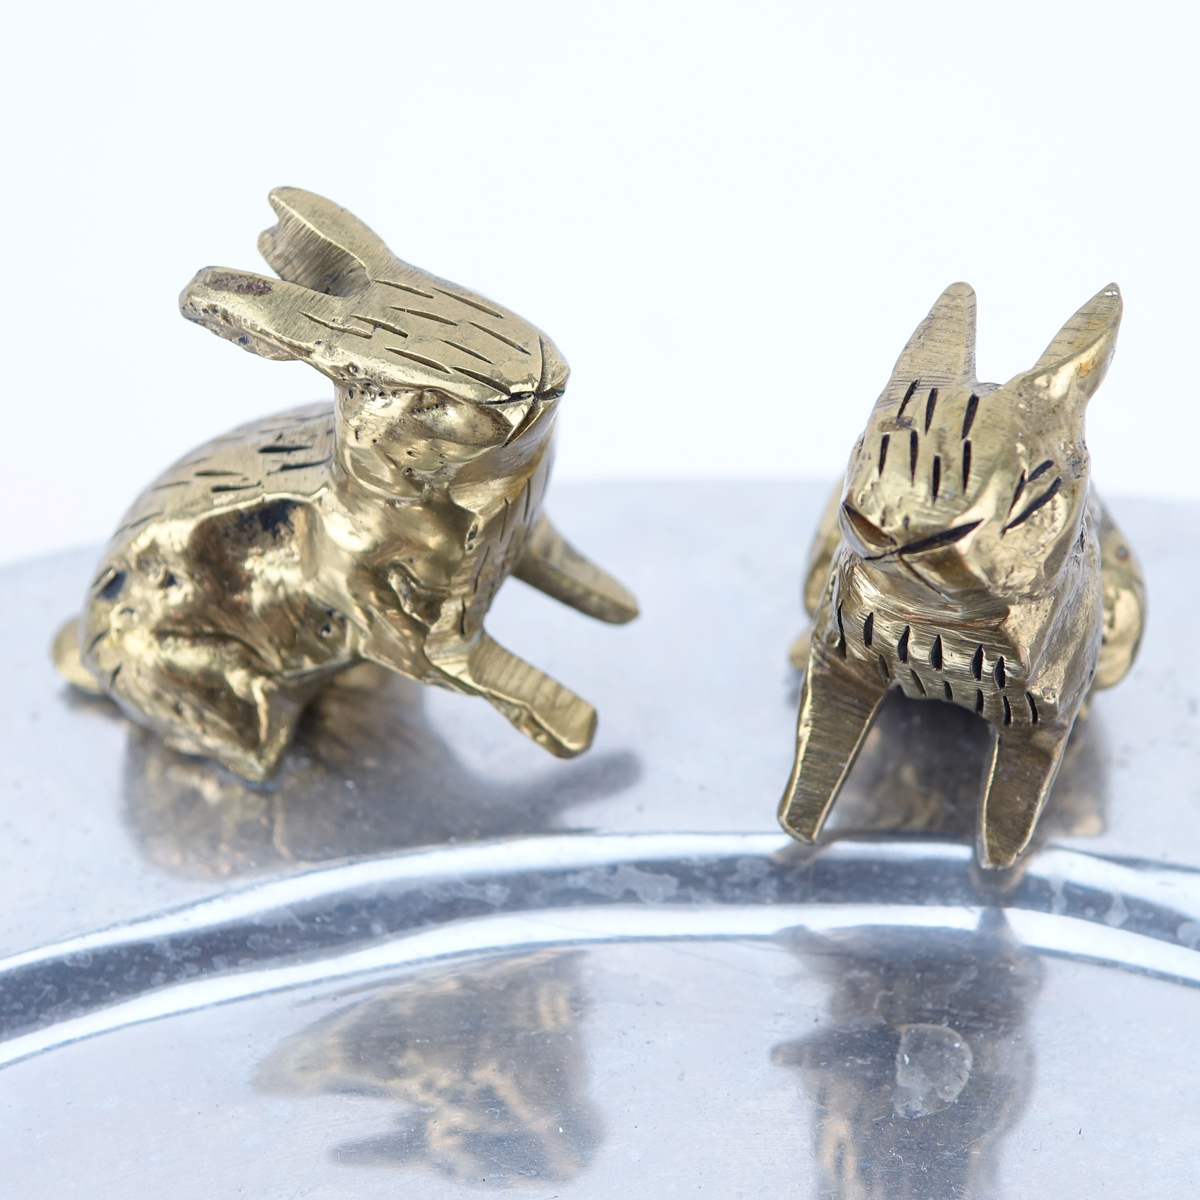 Two (2) Mexican Pewter Trays With Applied Brass Animals. Labeled Hecho En Mexico.